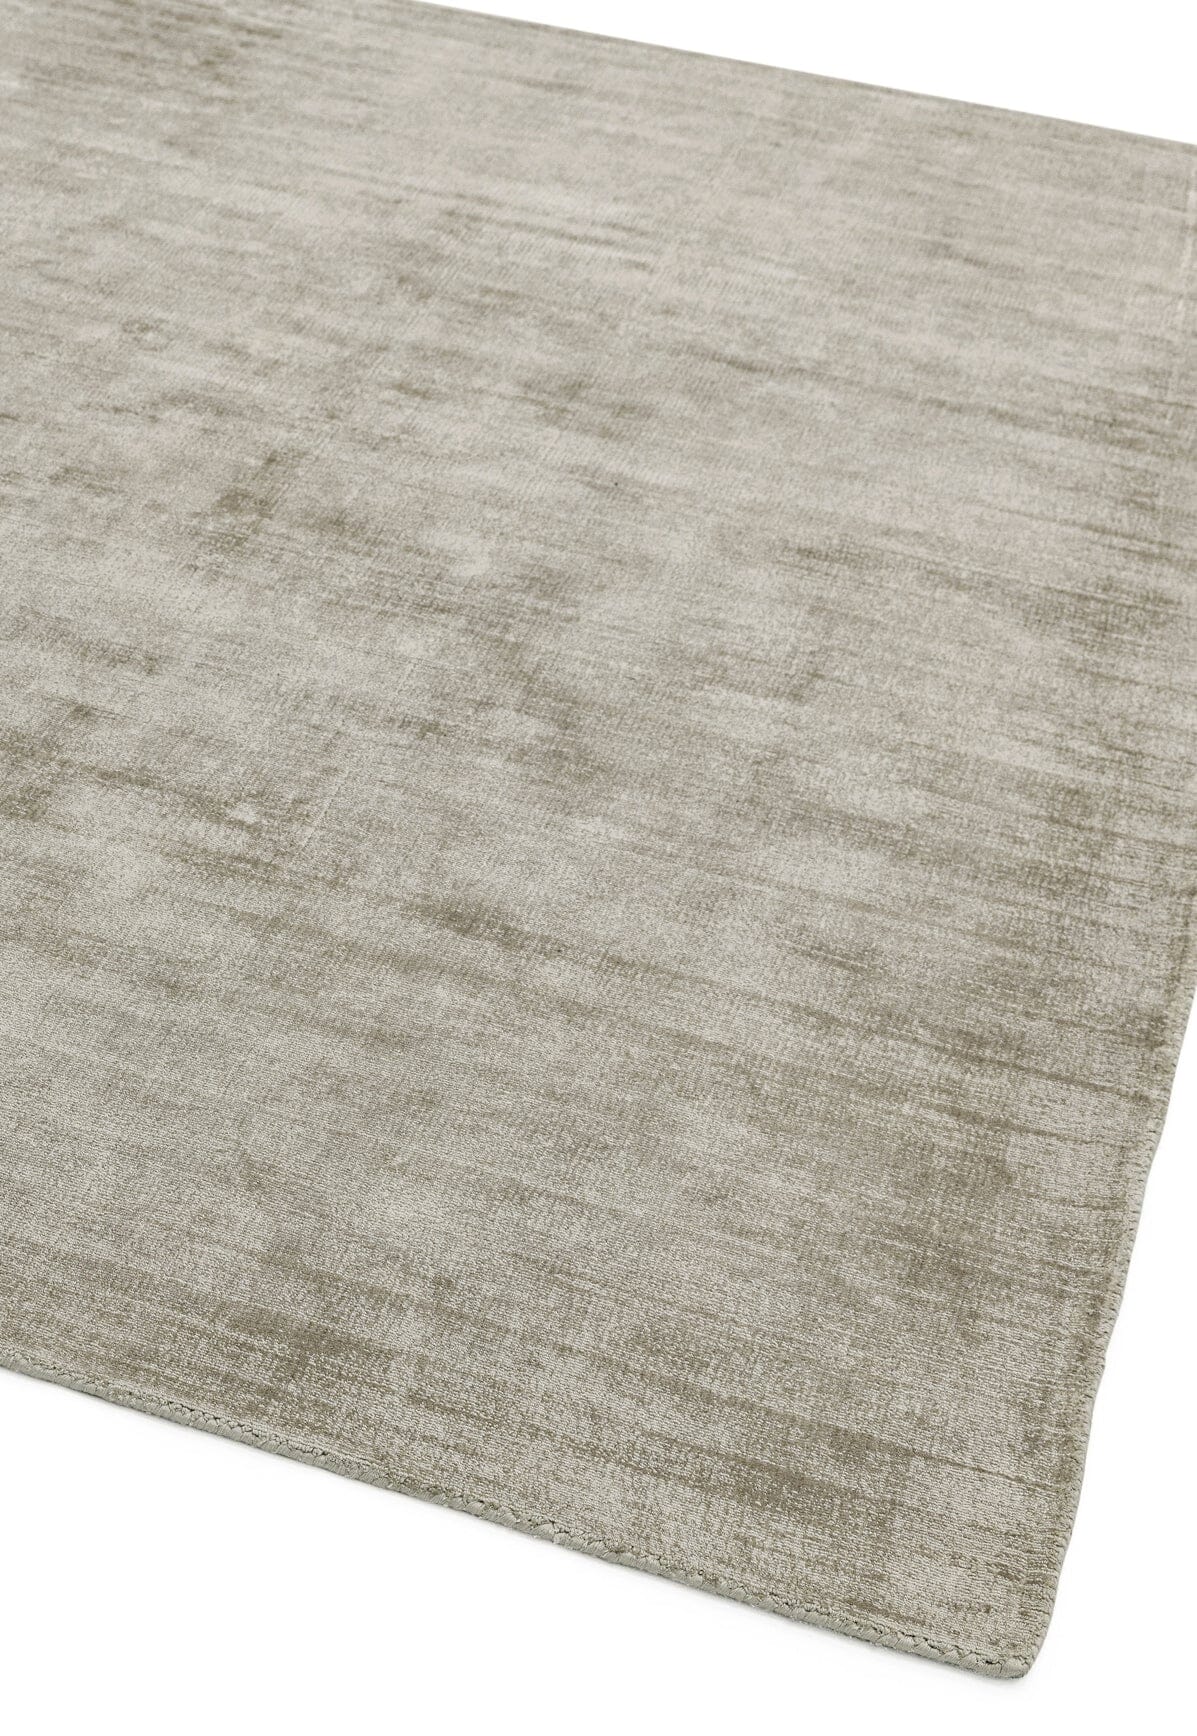  Asiatic Carpets-Asiatic Carpets Blade Hand Woven Rug Smoke - 120 x 170cm-Grey, Silver 429 